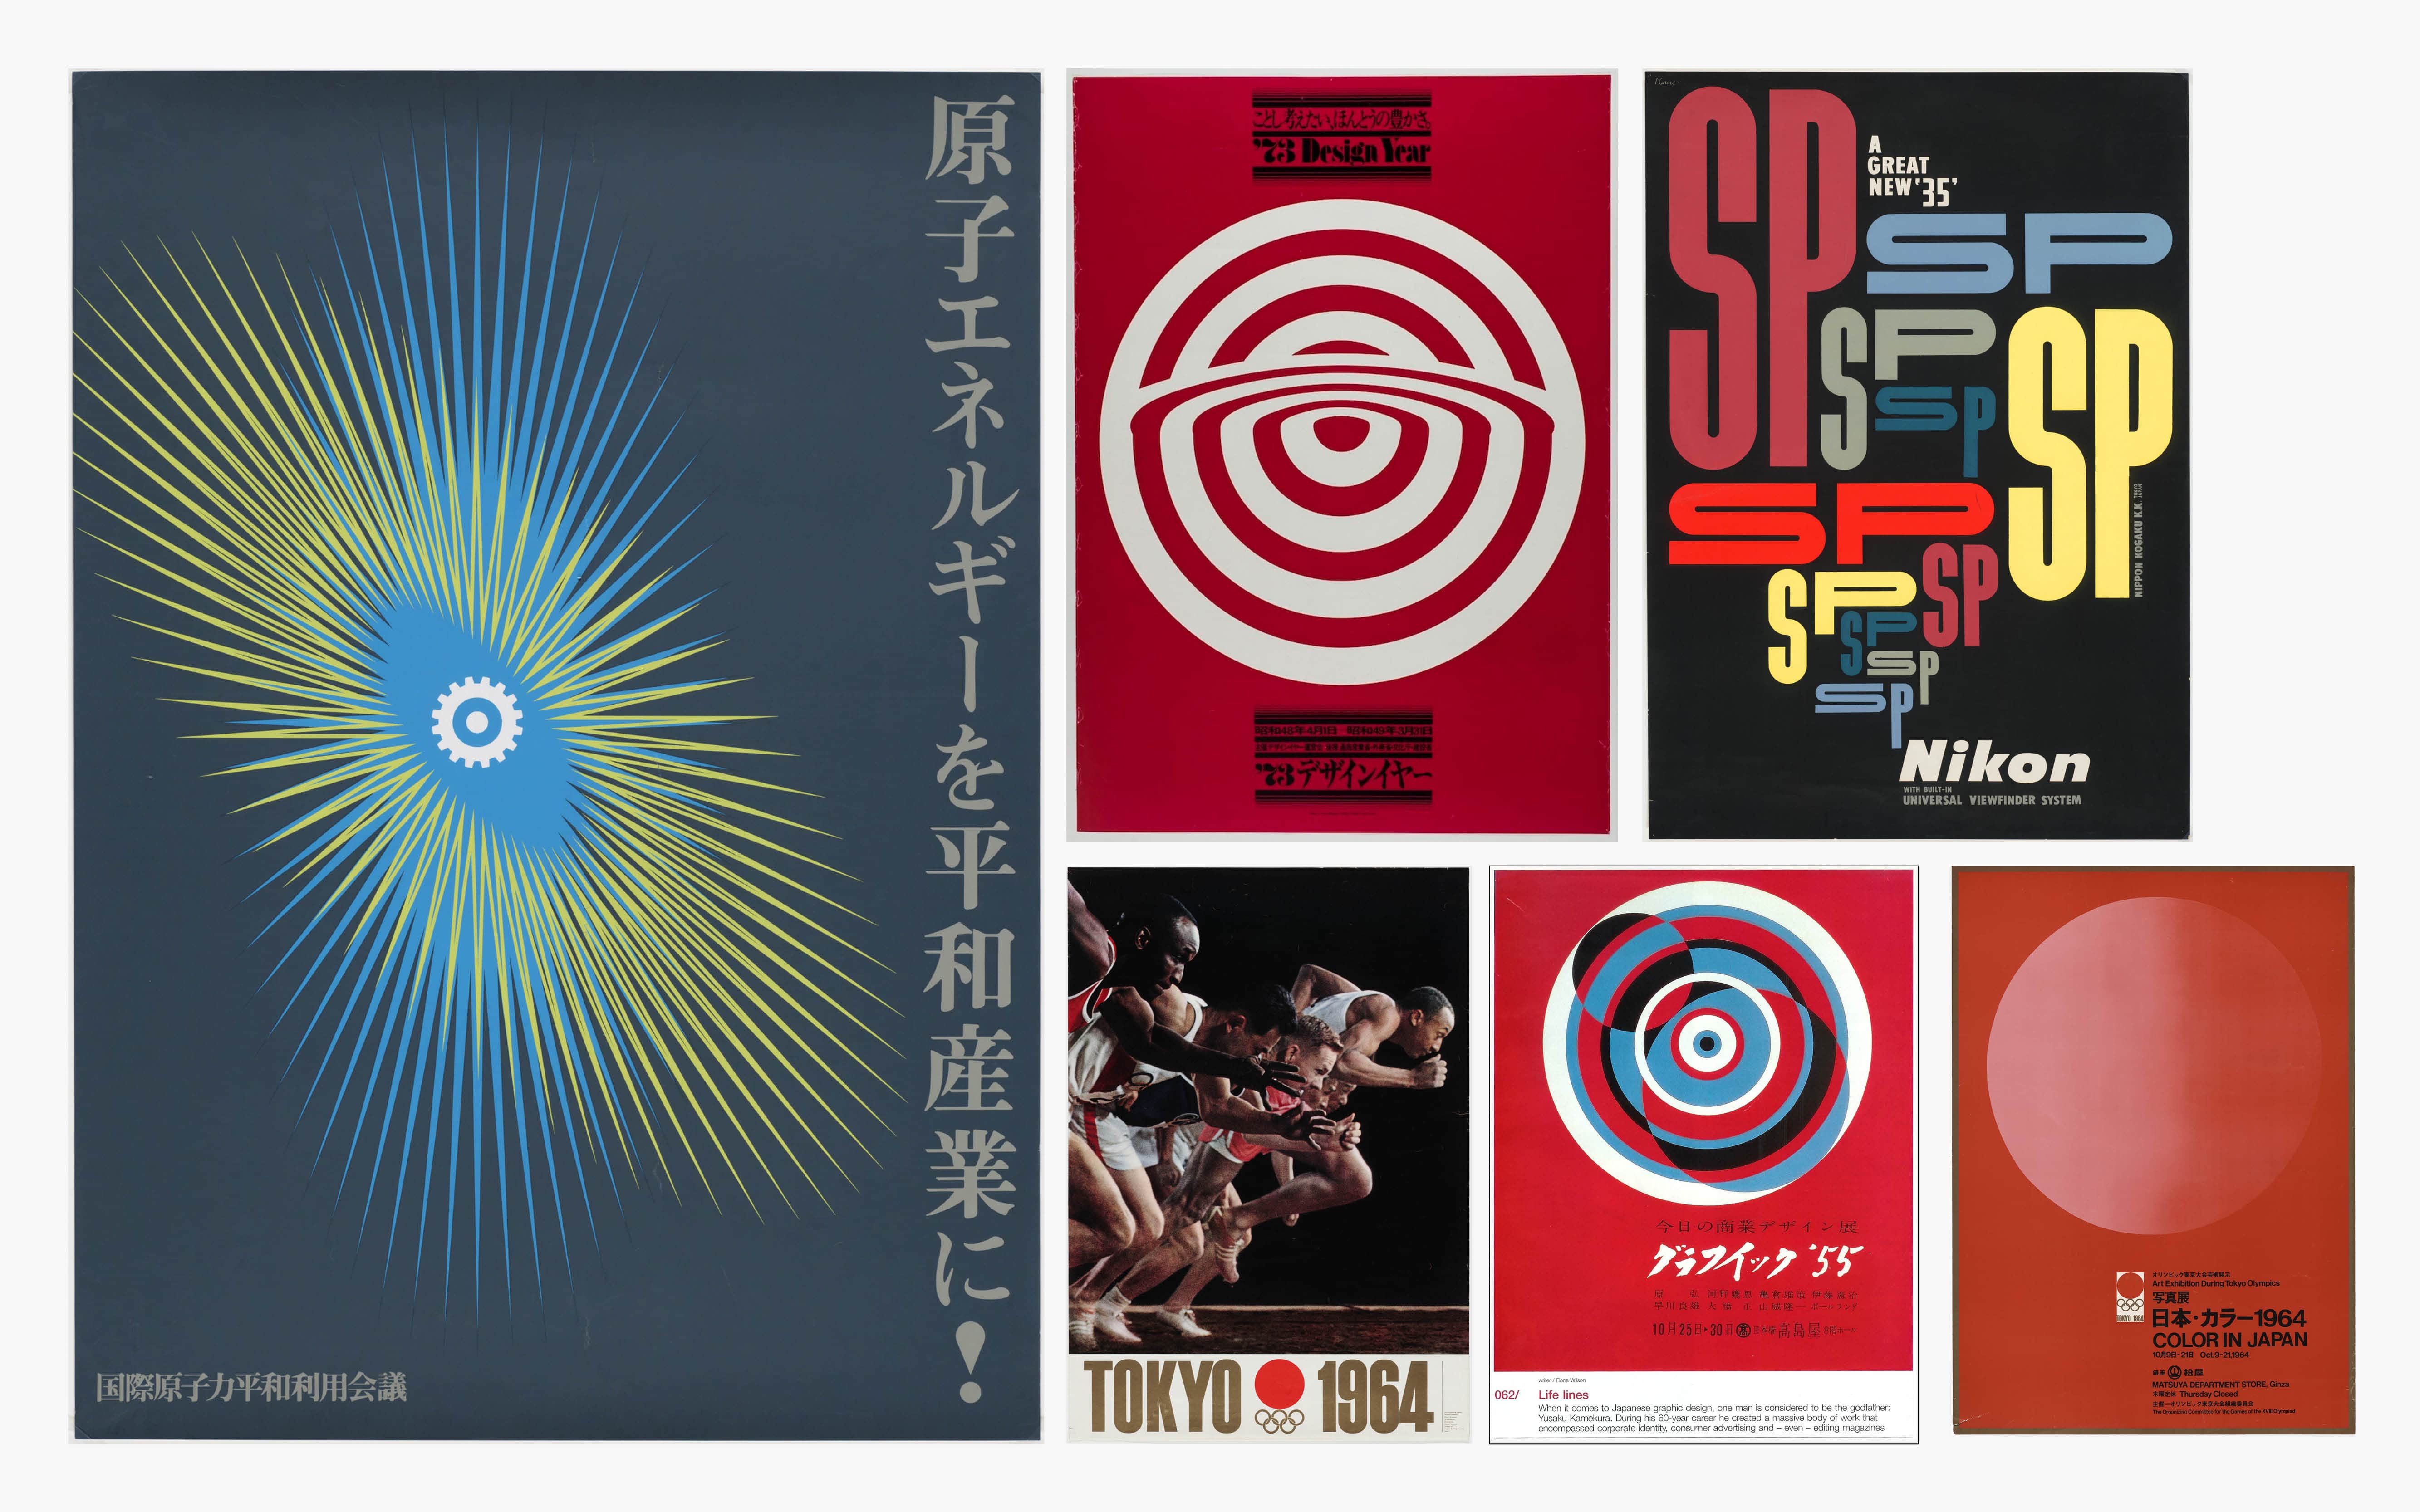 Yusaku Kamekura was the perfect example of the Japanese modernist designer, dealing with western and japanese influences. His poster design use geometric shapes, bright colors and dynamic composition are brilliant in photographic posters. See more: MoMa ; It’s nice that